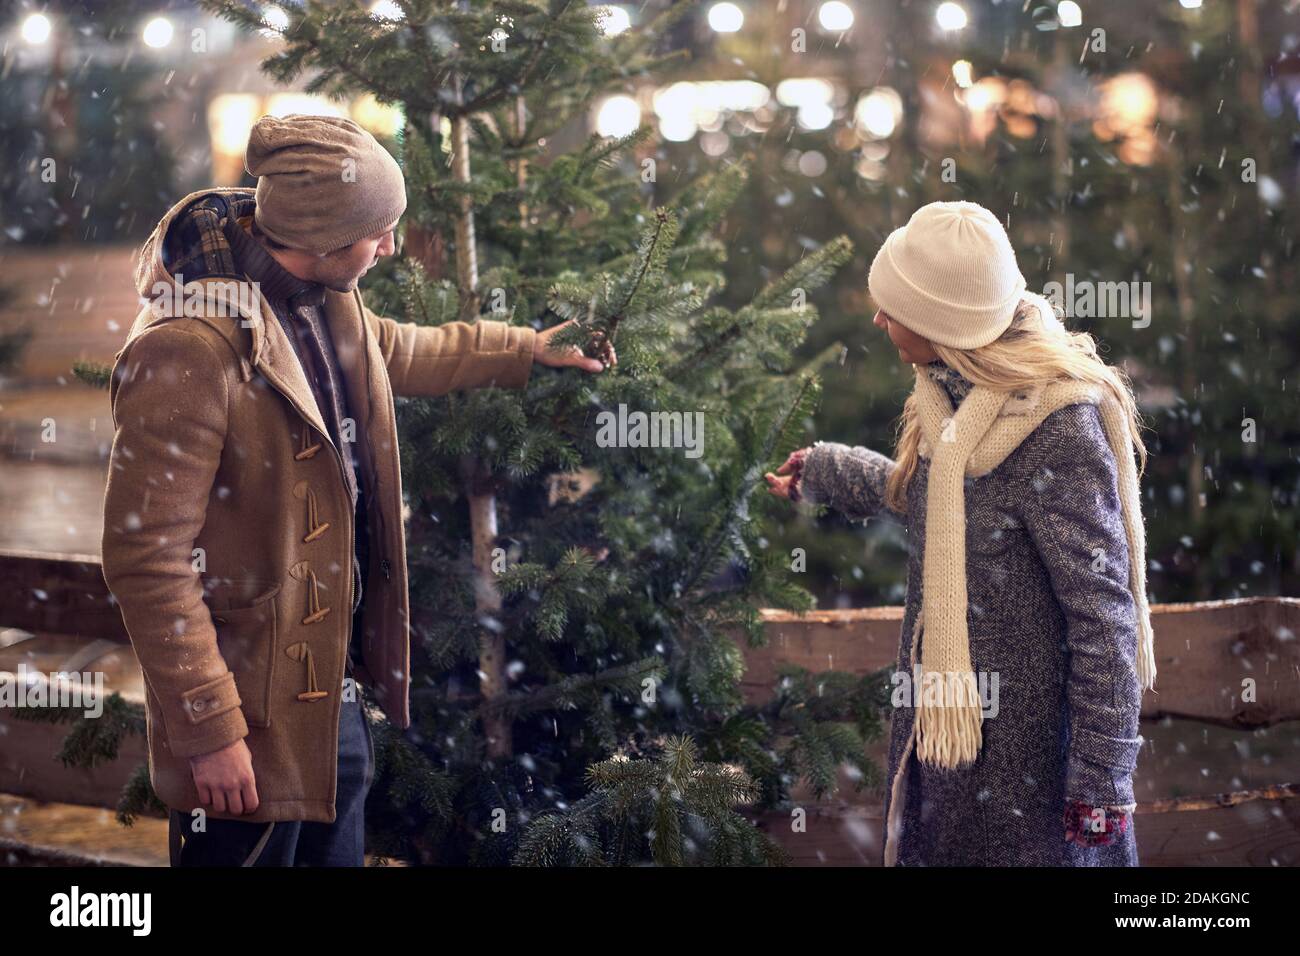 A young couple inspecting a christmas tree they want to buy on a magical snowy night in the city. Christmas tree, love, relationship, Xmas, snow Stock Photo